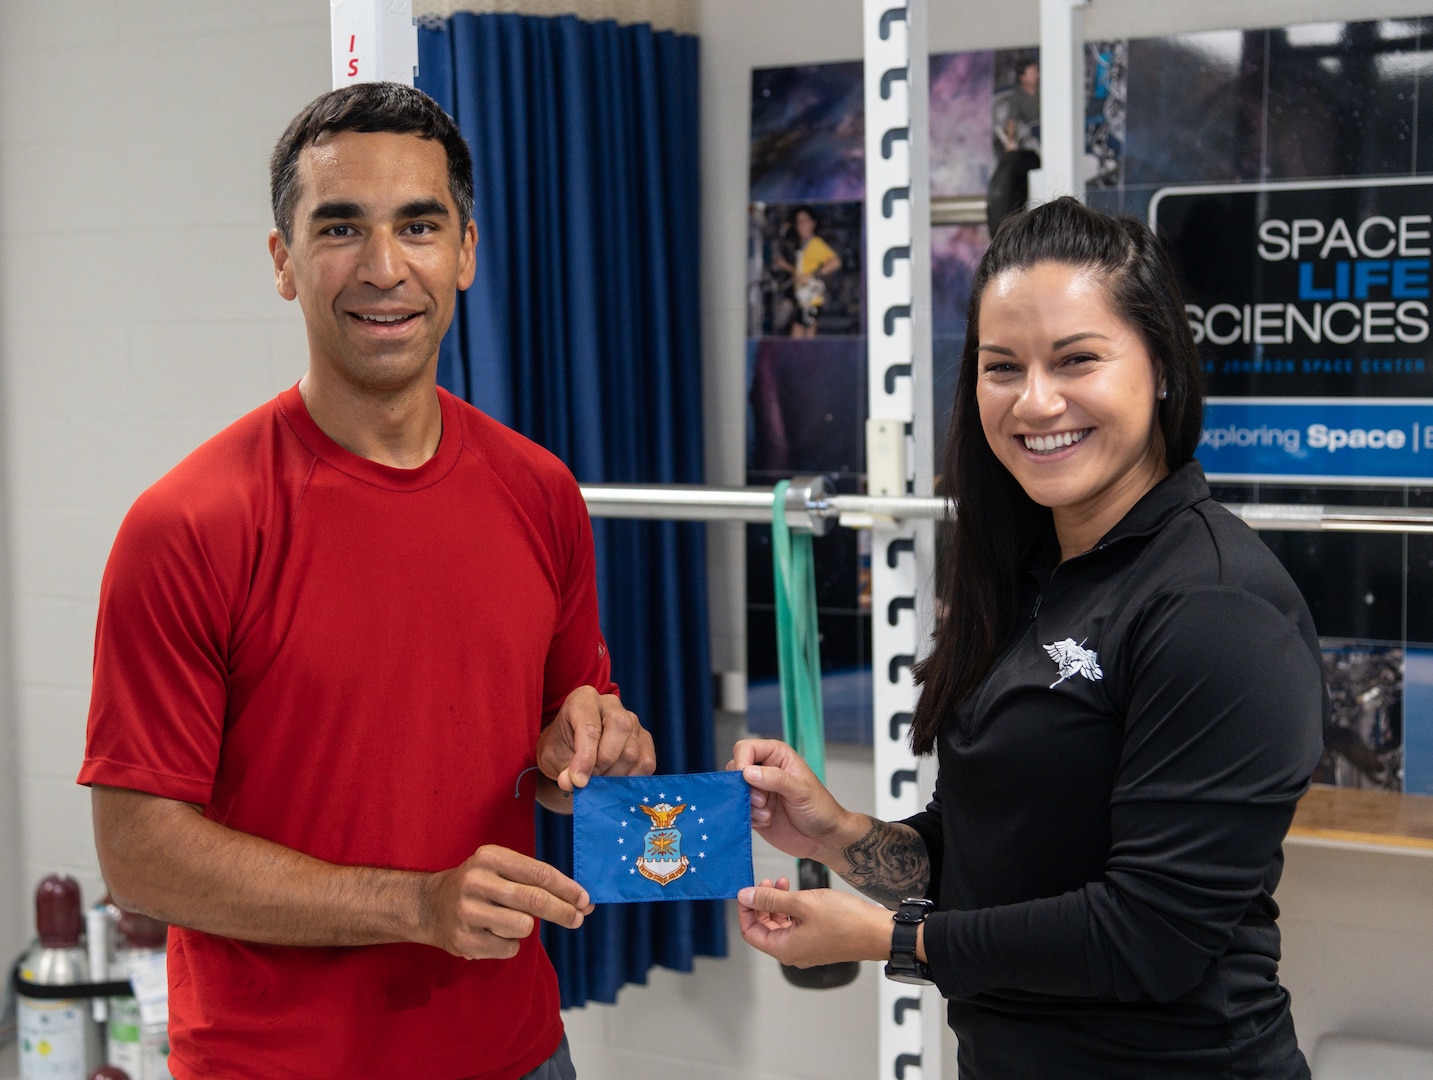 U.S. Air Force Staff Sgt. Emily Valdovinos (right), Special Warfare Human Performance Squadron physical medicine technician, poses for a portrait with Col. Raja Chari (left), NASA astronaut, with a USAF flag that Chari brought aboard the International Space Station at the Johnson Space Center in Houston, Texas, Jun. 16, 2022. Valdovinos was hand-selected by the NASA Astronaut Strength, Conditioning and Rehab Group to help develop personalized strength, conditioning, mobility, and rehabilitative plans for NASA astronauts.